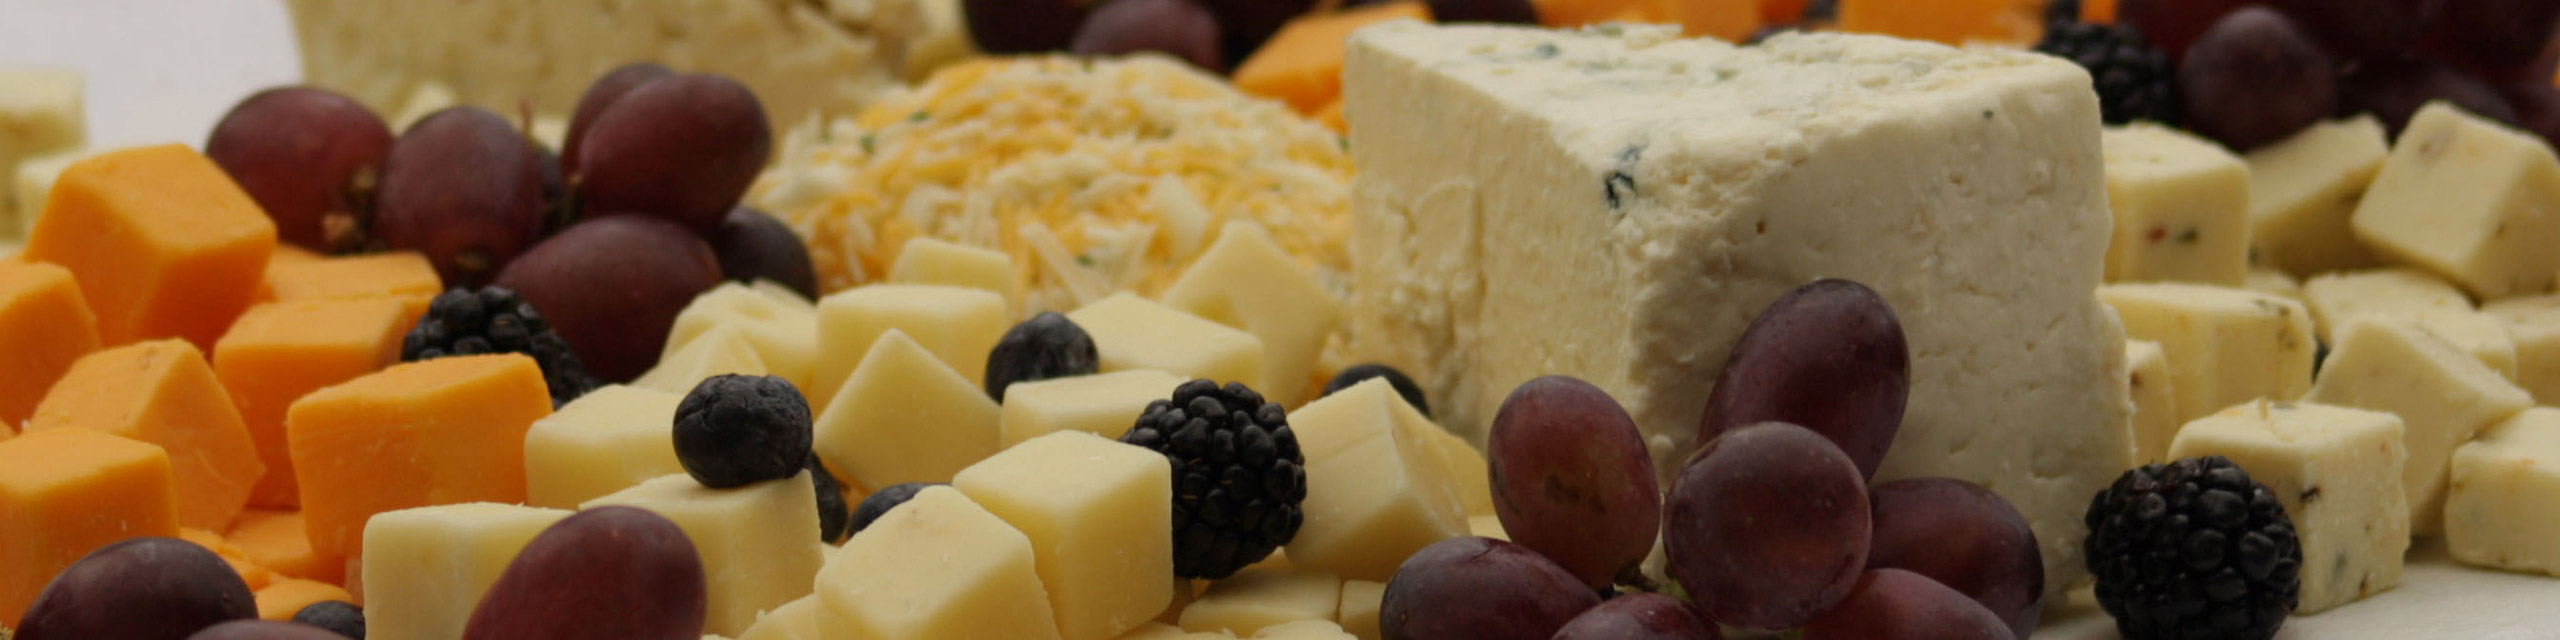 A fruit and cheese tray